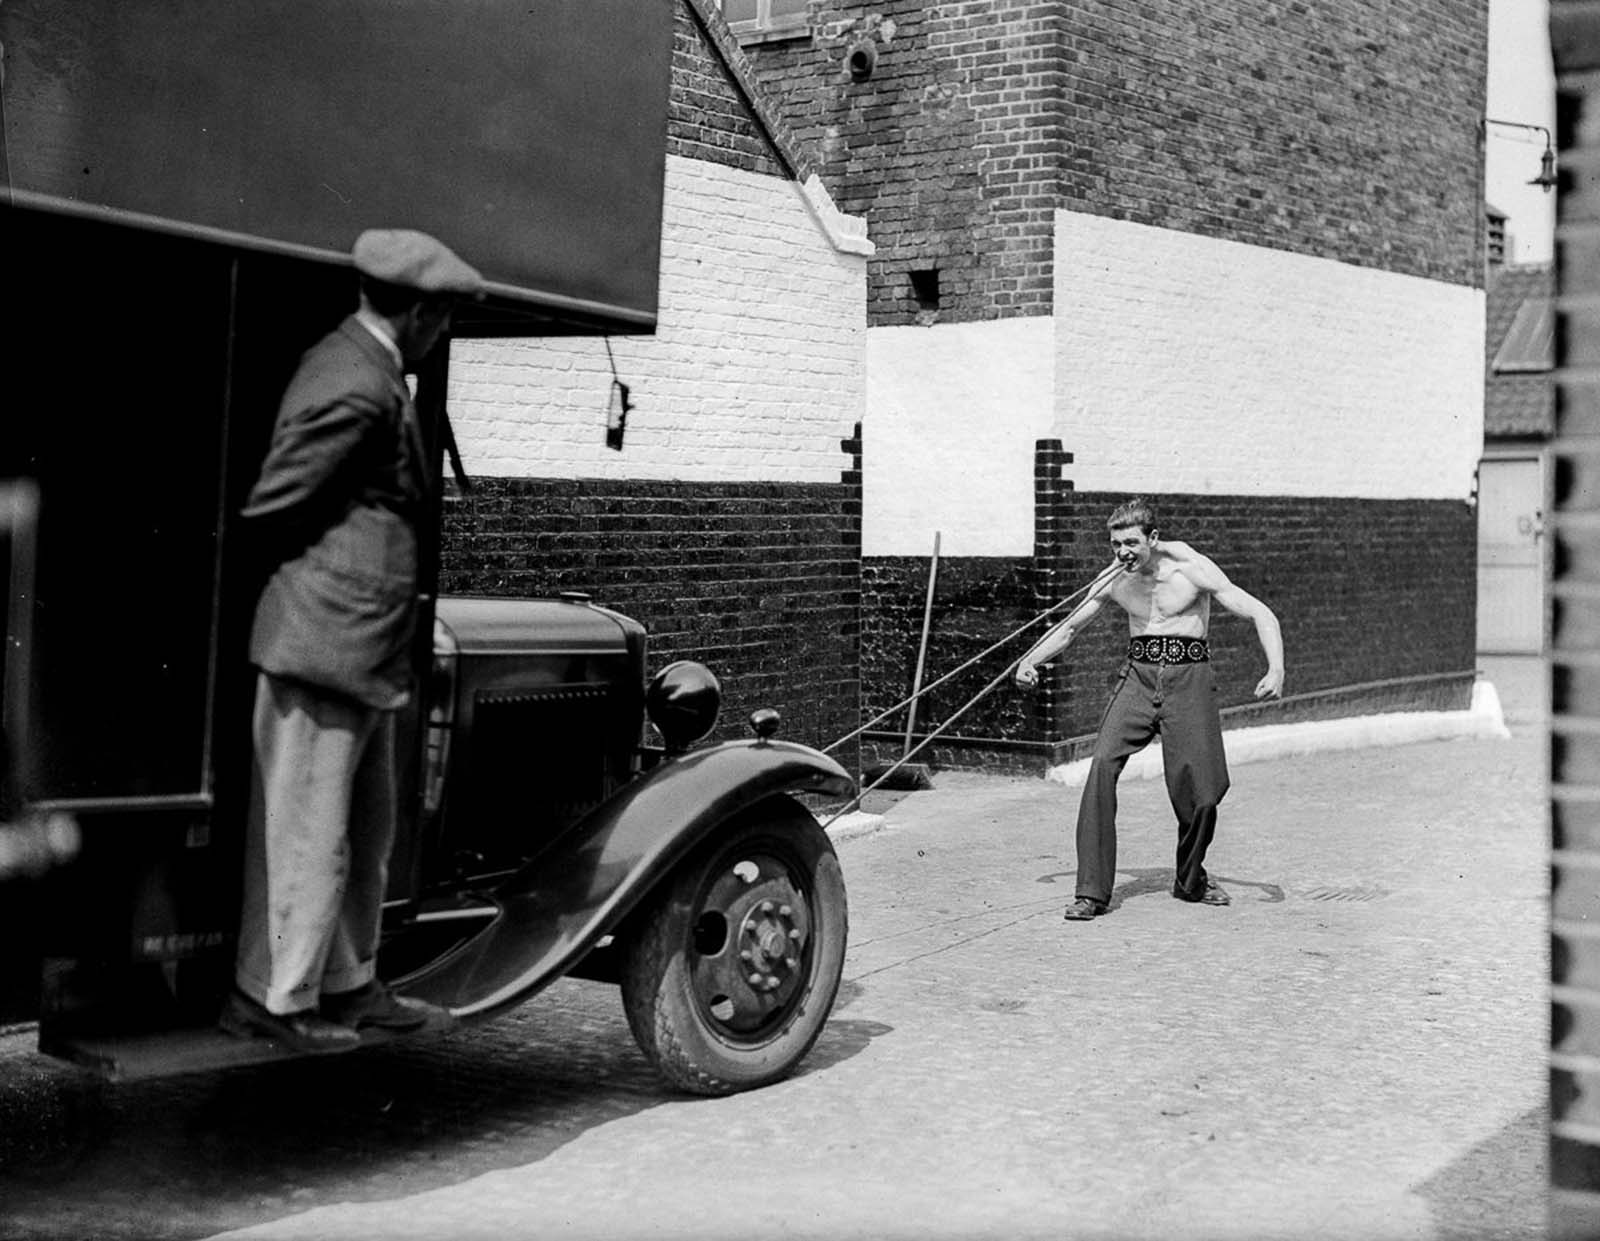 J. Rolleano pulls a truck with his teeth, 1932.